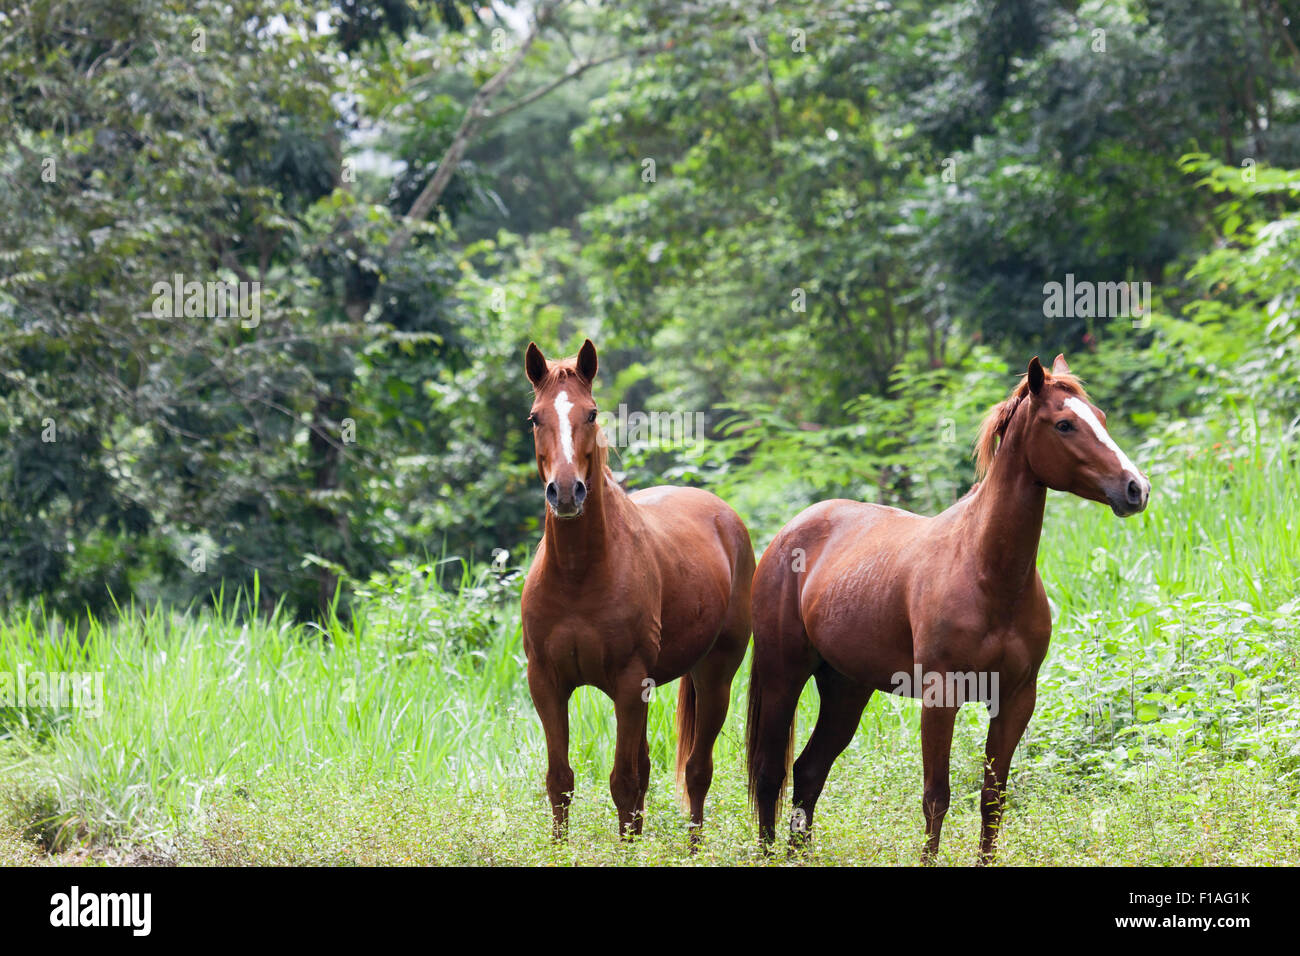 Two brown horses standing in a jungle field in the Cayo District of Belize. Stock Photo